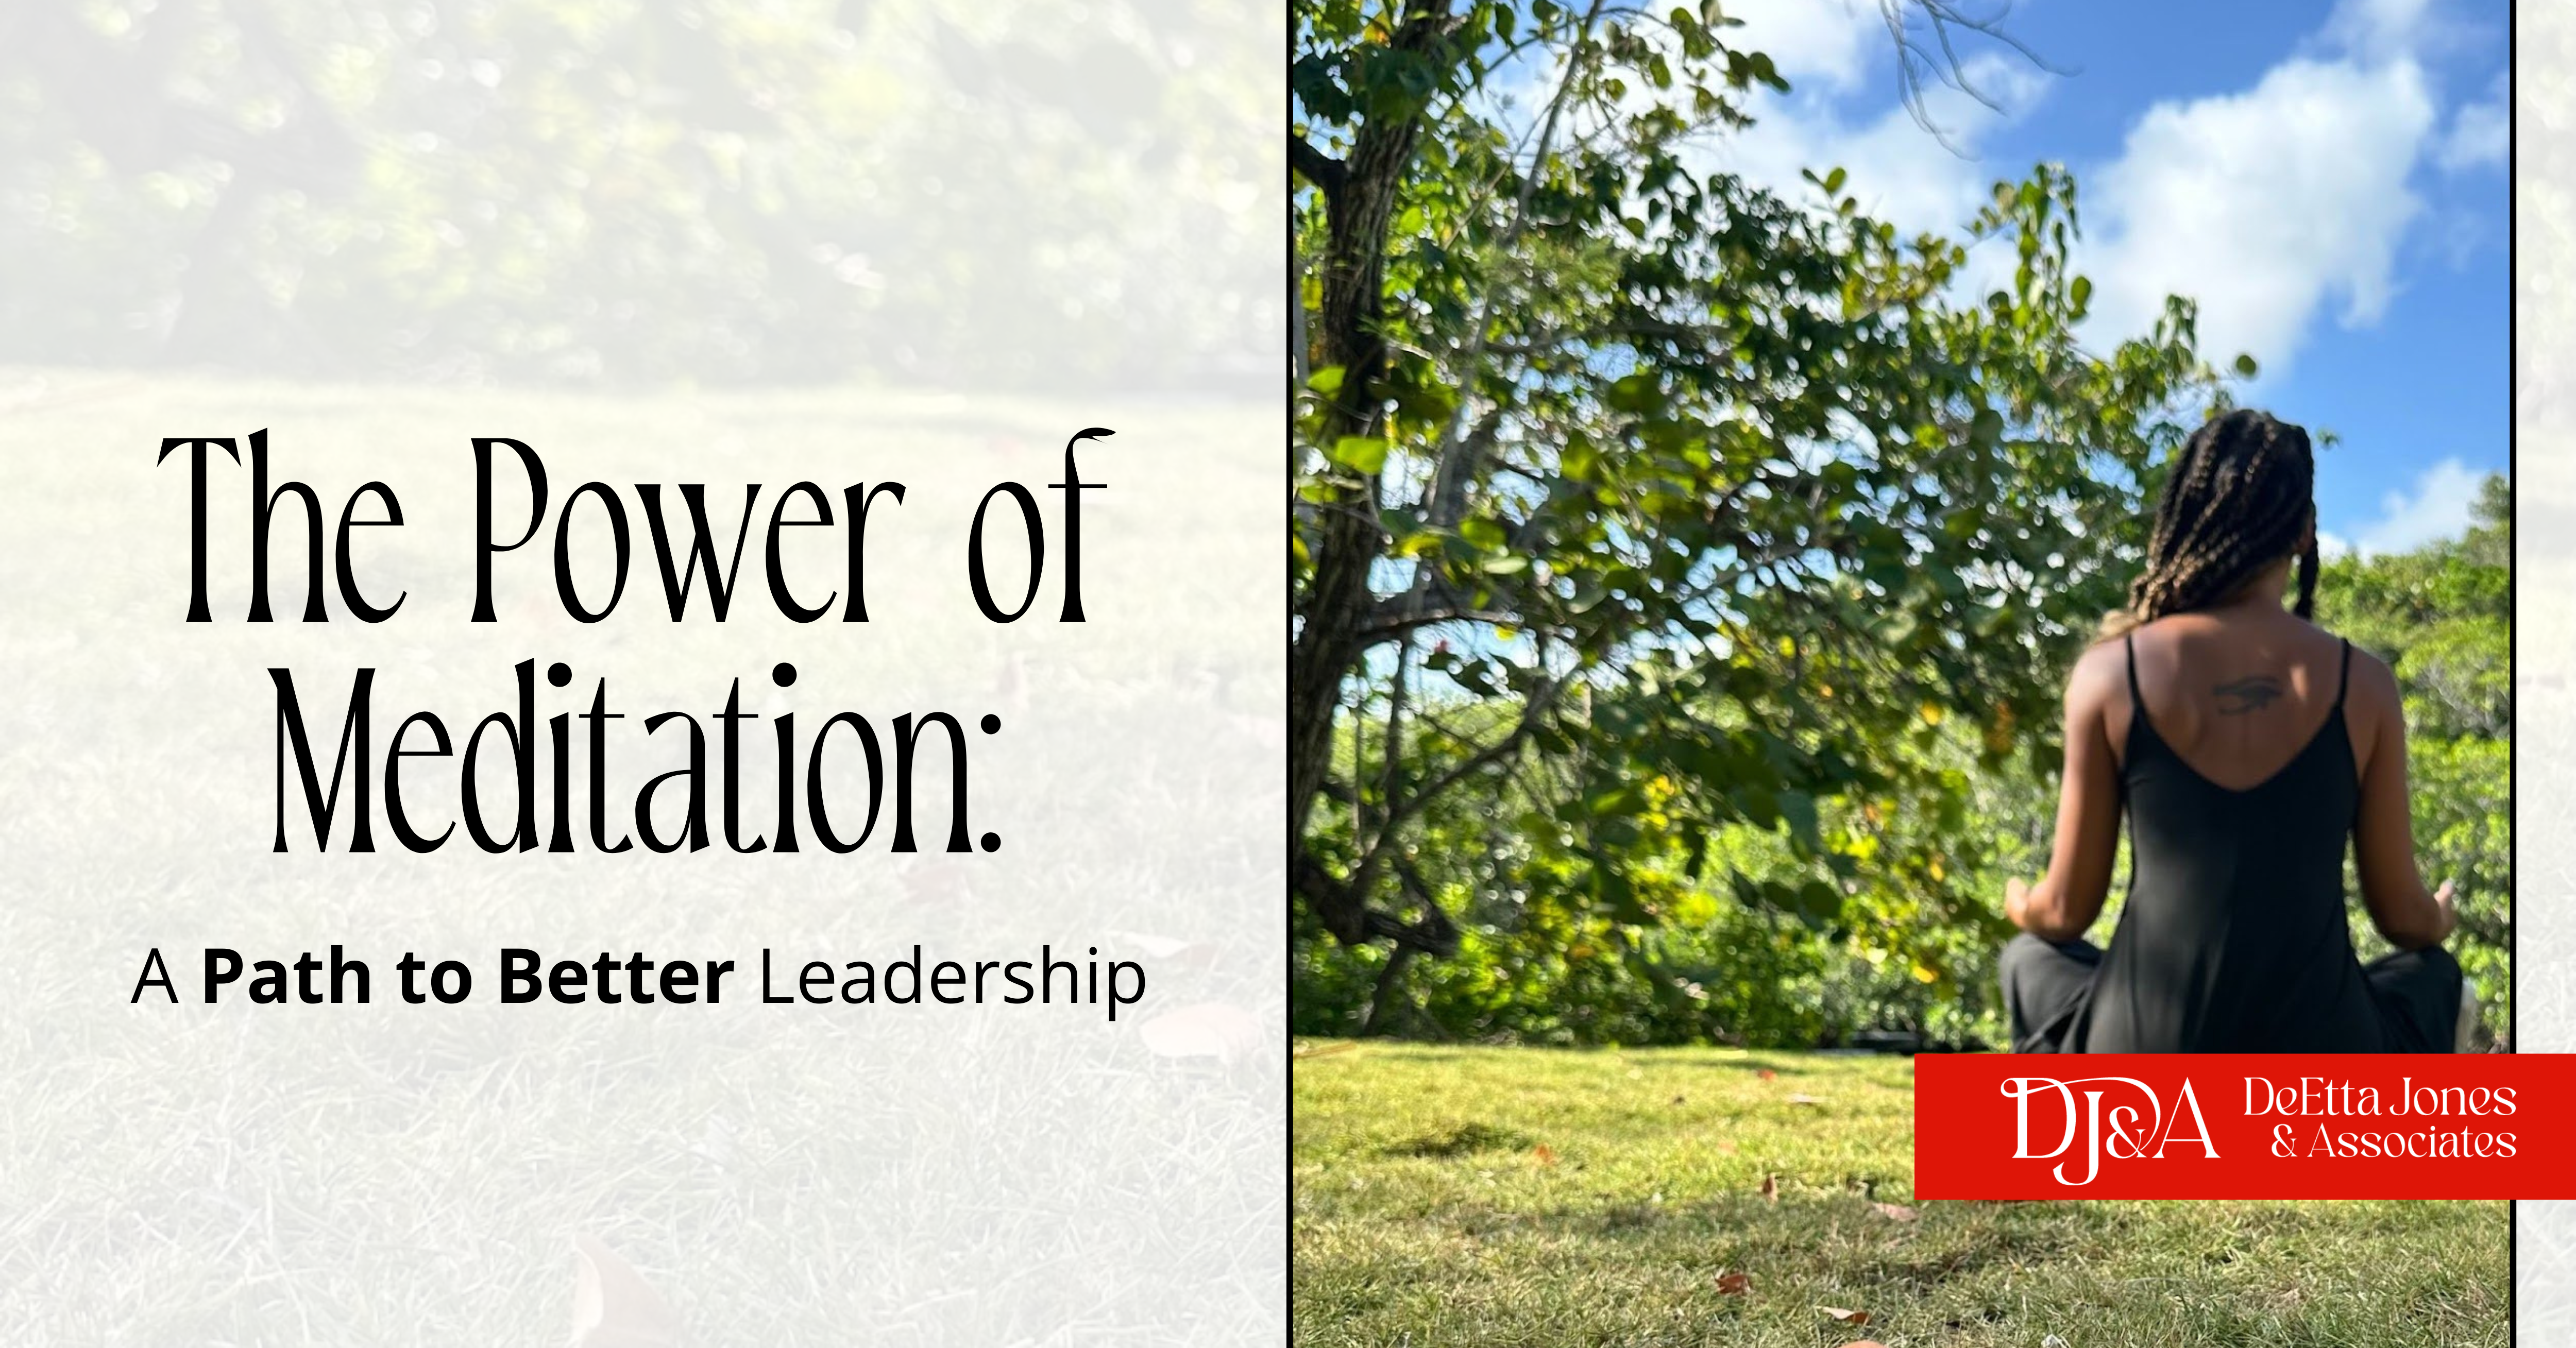 The Power of Meditation: A Path to Better Leadership